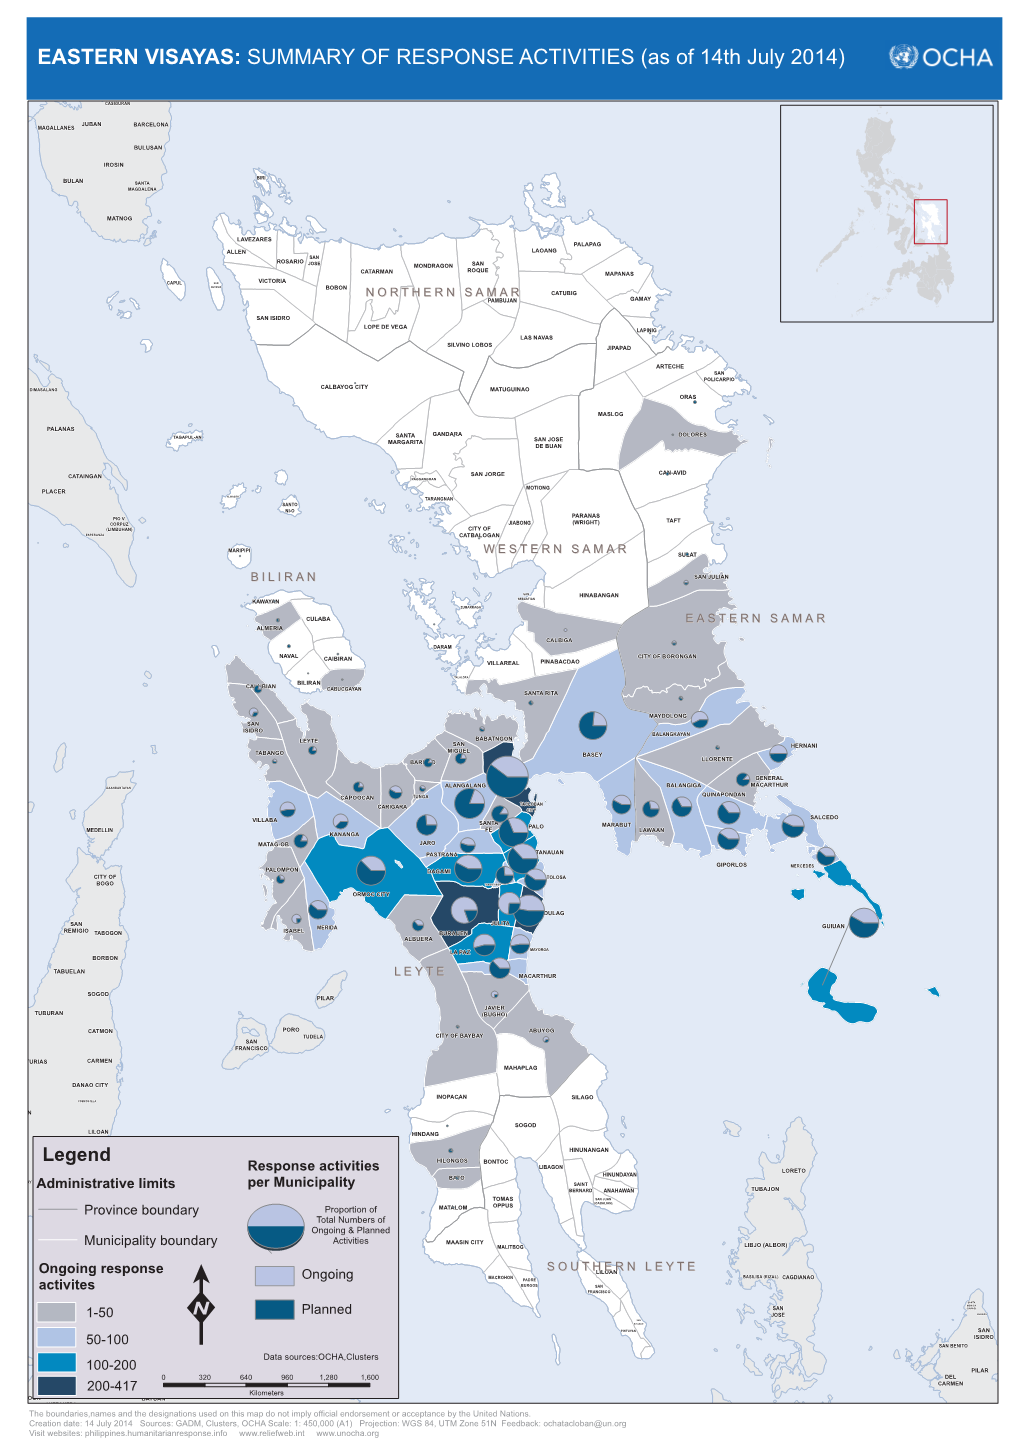 EASTERN VISAYAS: SUMMARY of RESPONSE ACTIVITIES (As of 14Th July 2014)